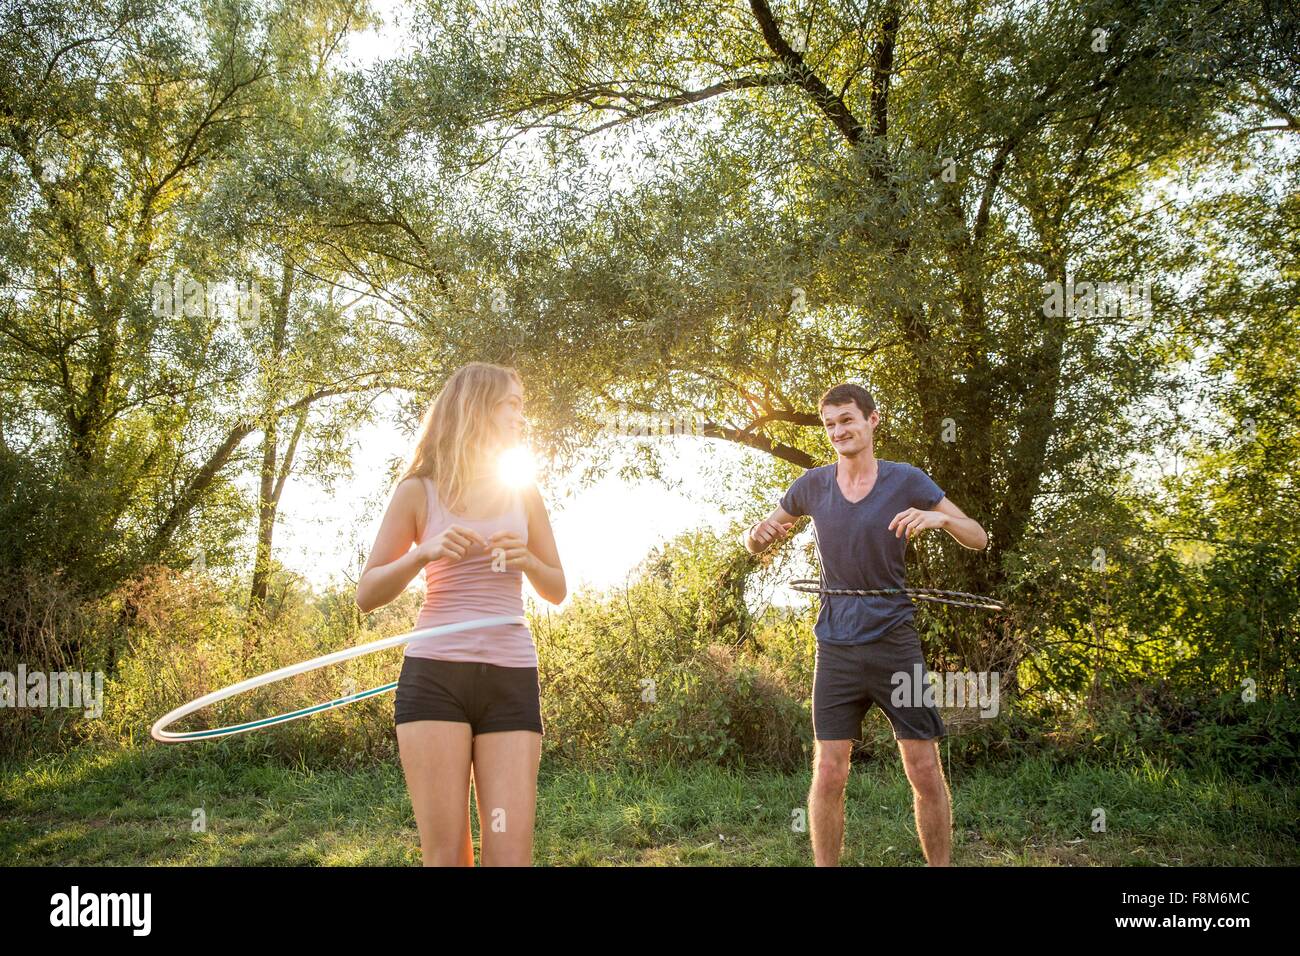 Young couple in rural environment, using hula hoops Stock Photo